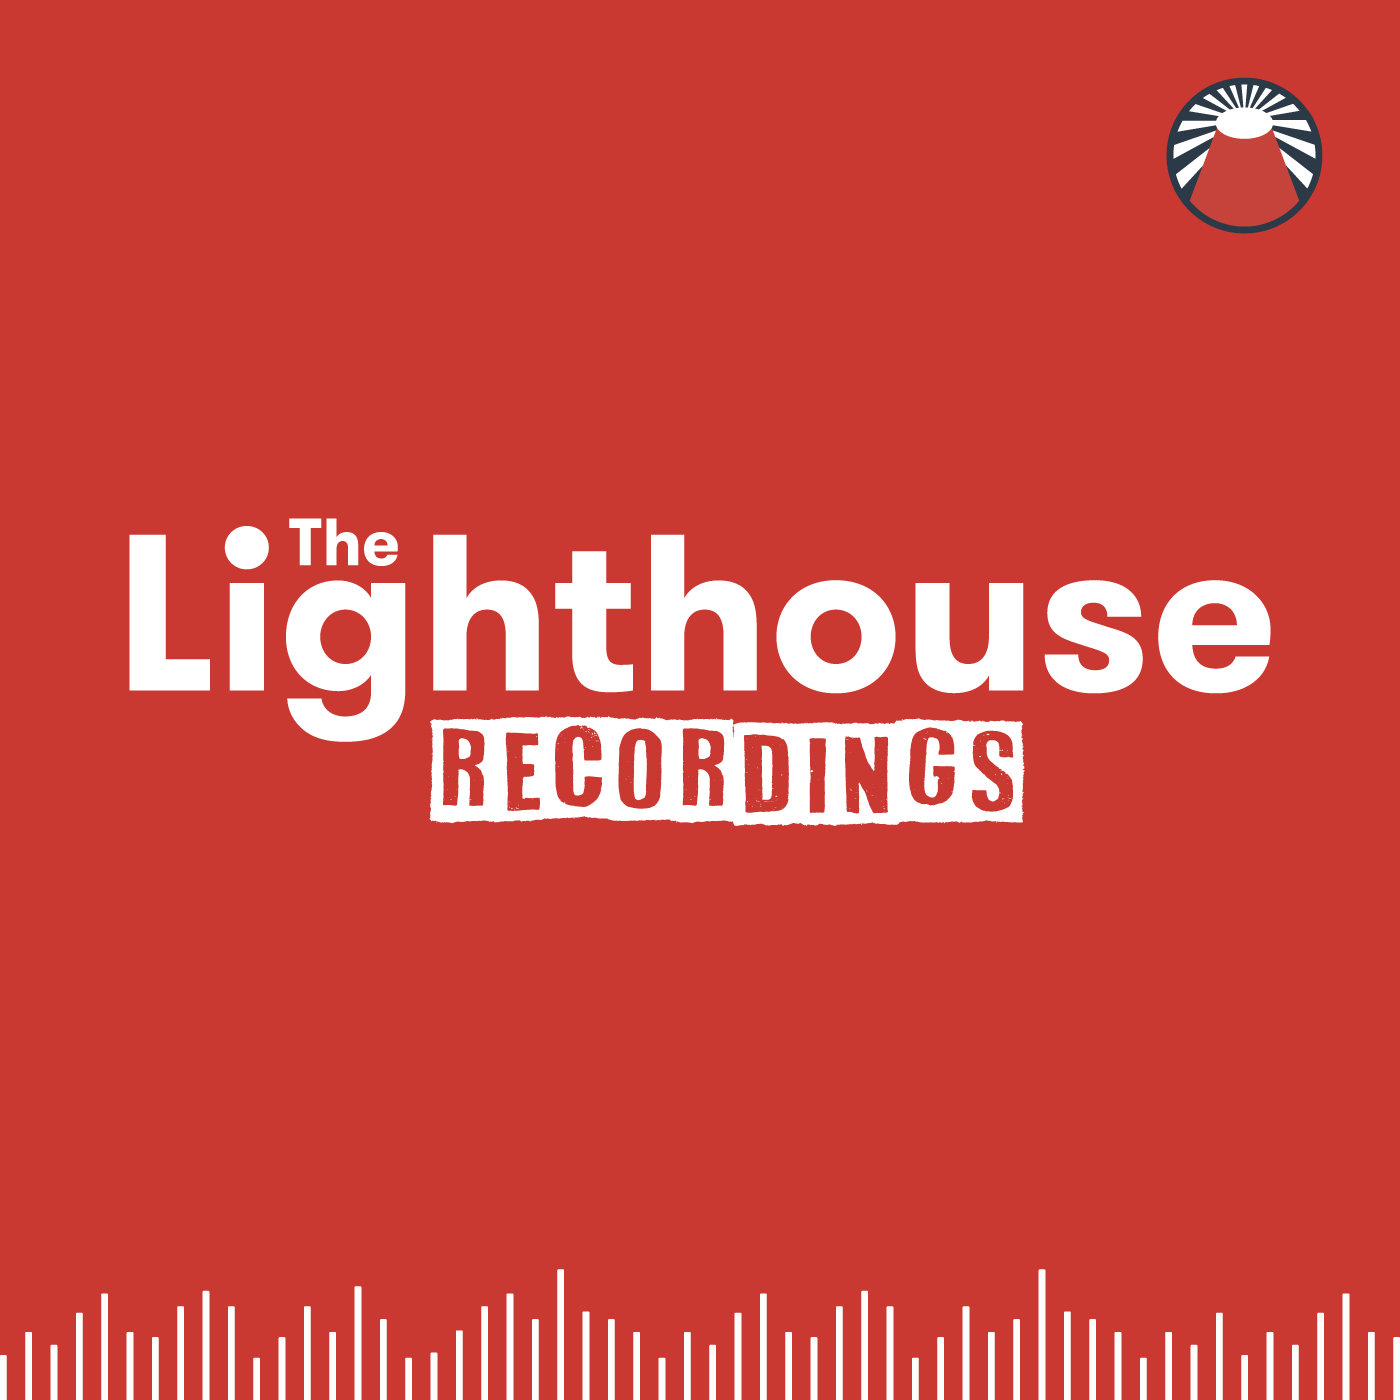 The Lighthouse Recordings